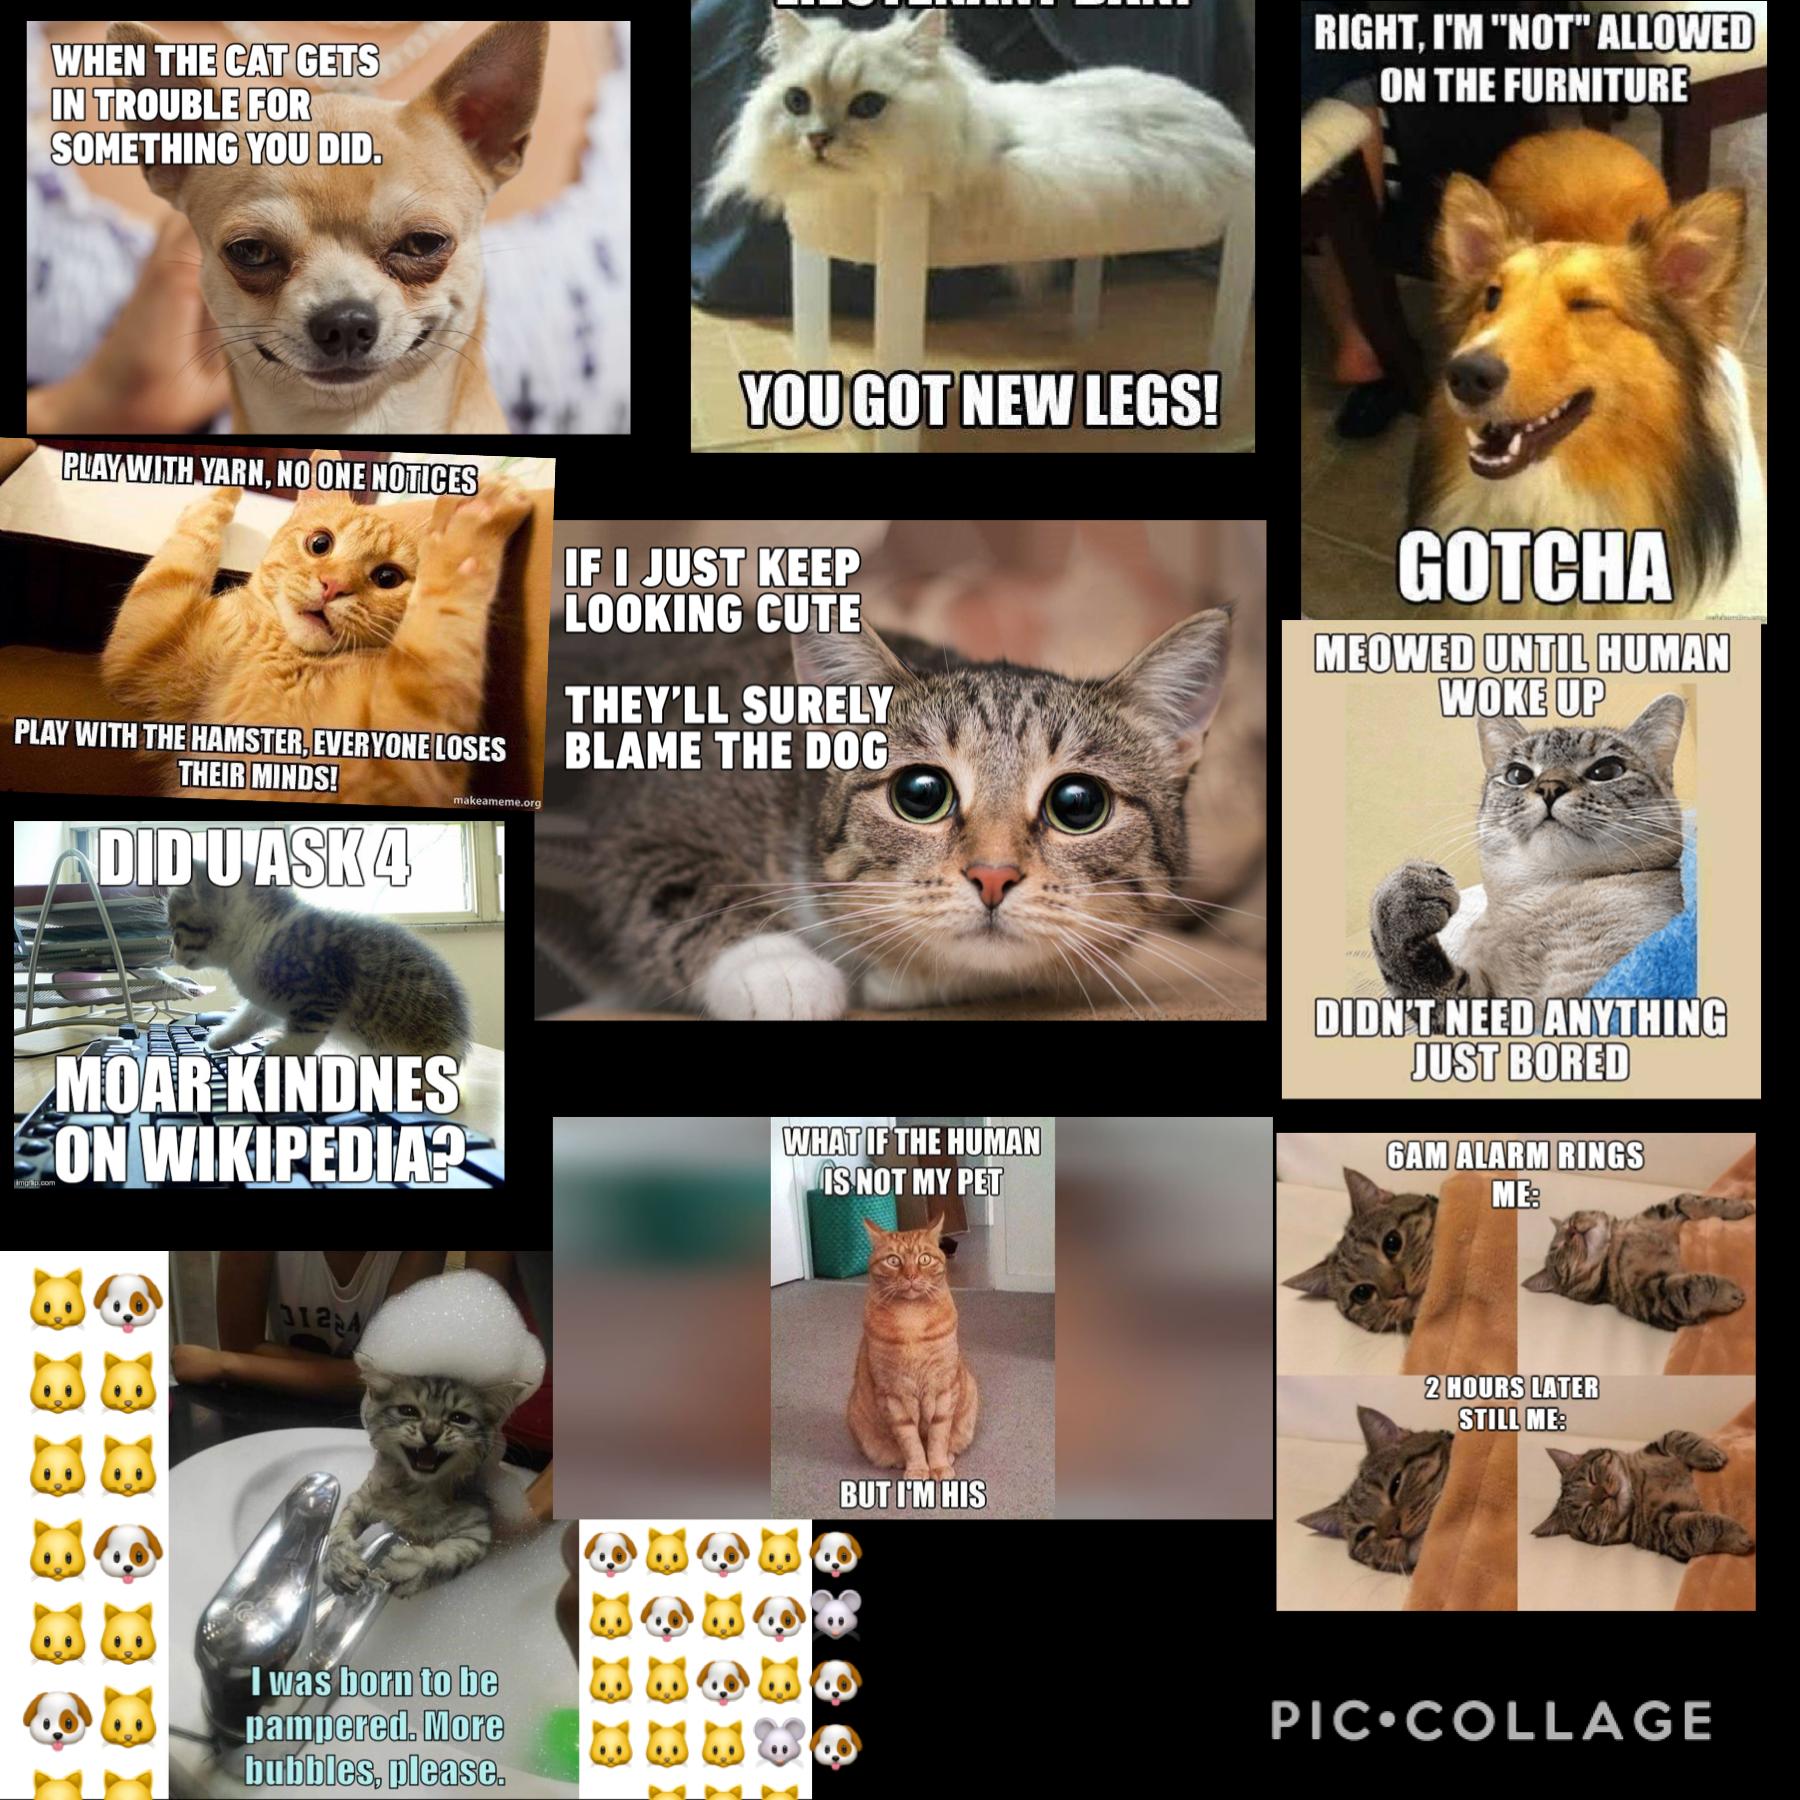 Here are some cat memes